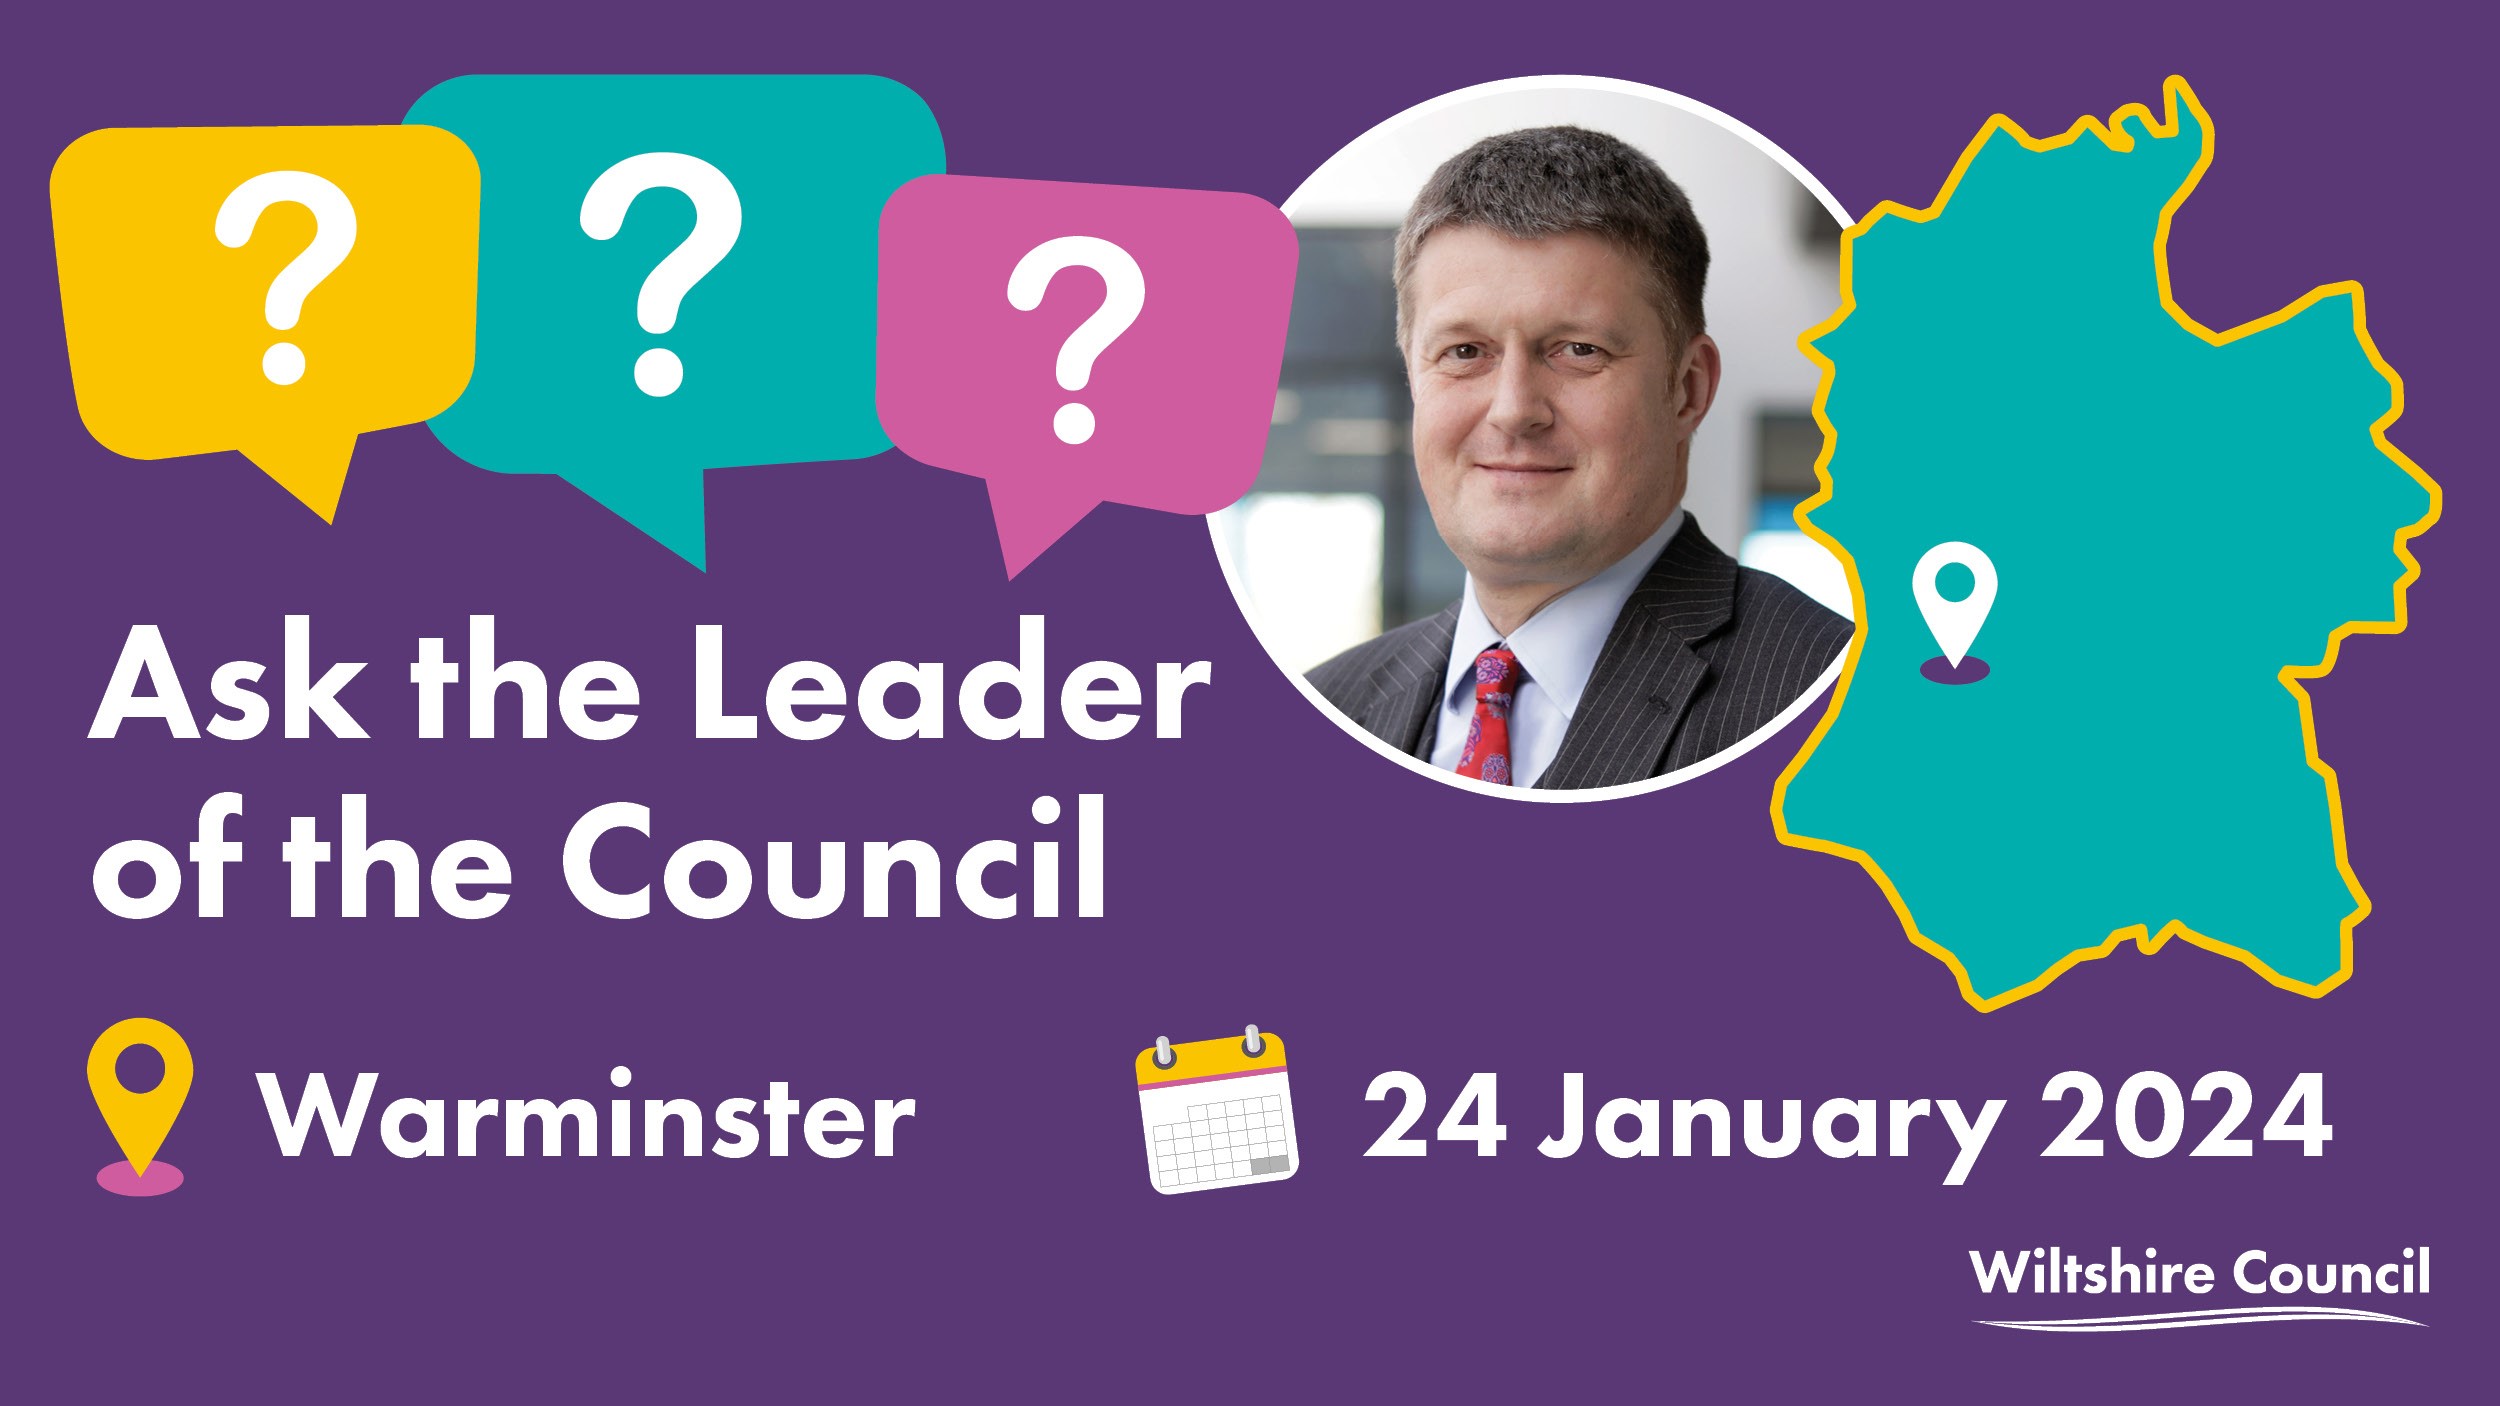 Date announced for Warminster 'Ask the Leader of the Council' event 